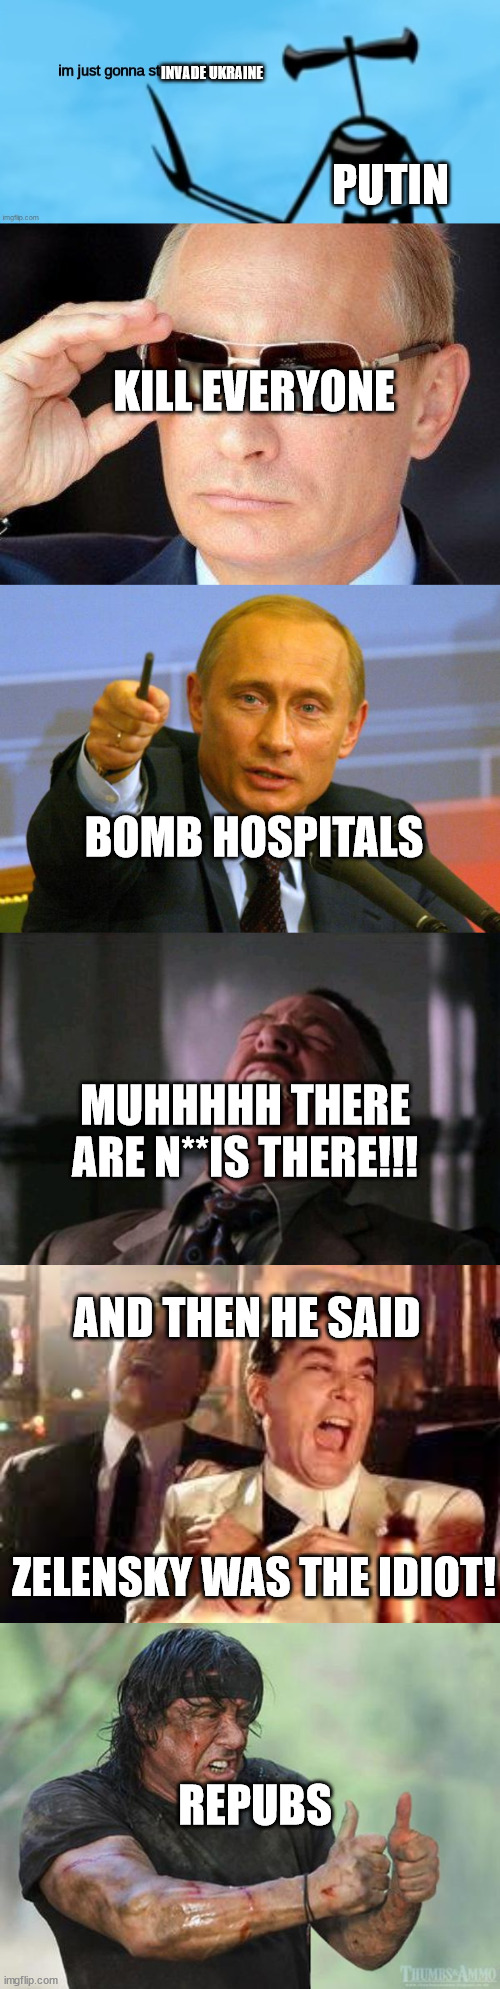 Ukraine Meme #! | INVADE UKRAINE; PUTIN; KILL EVERYONE; BOMB HOSPITALS; MUHHHHH THERE ARE N**IS THERE!!! AND THEN HE SAID; ZELENSKY WAS THE IDIOT! REPUBS | image tagged in shadow siren im just gonna stop ya right there,putin cool guy,memes,good guy putin,spider man boss,and then he said | made w/ Imgflip meme maker